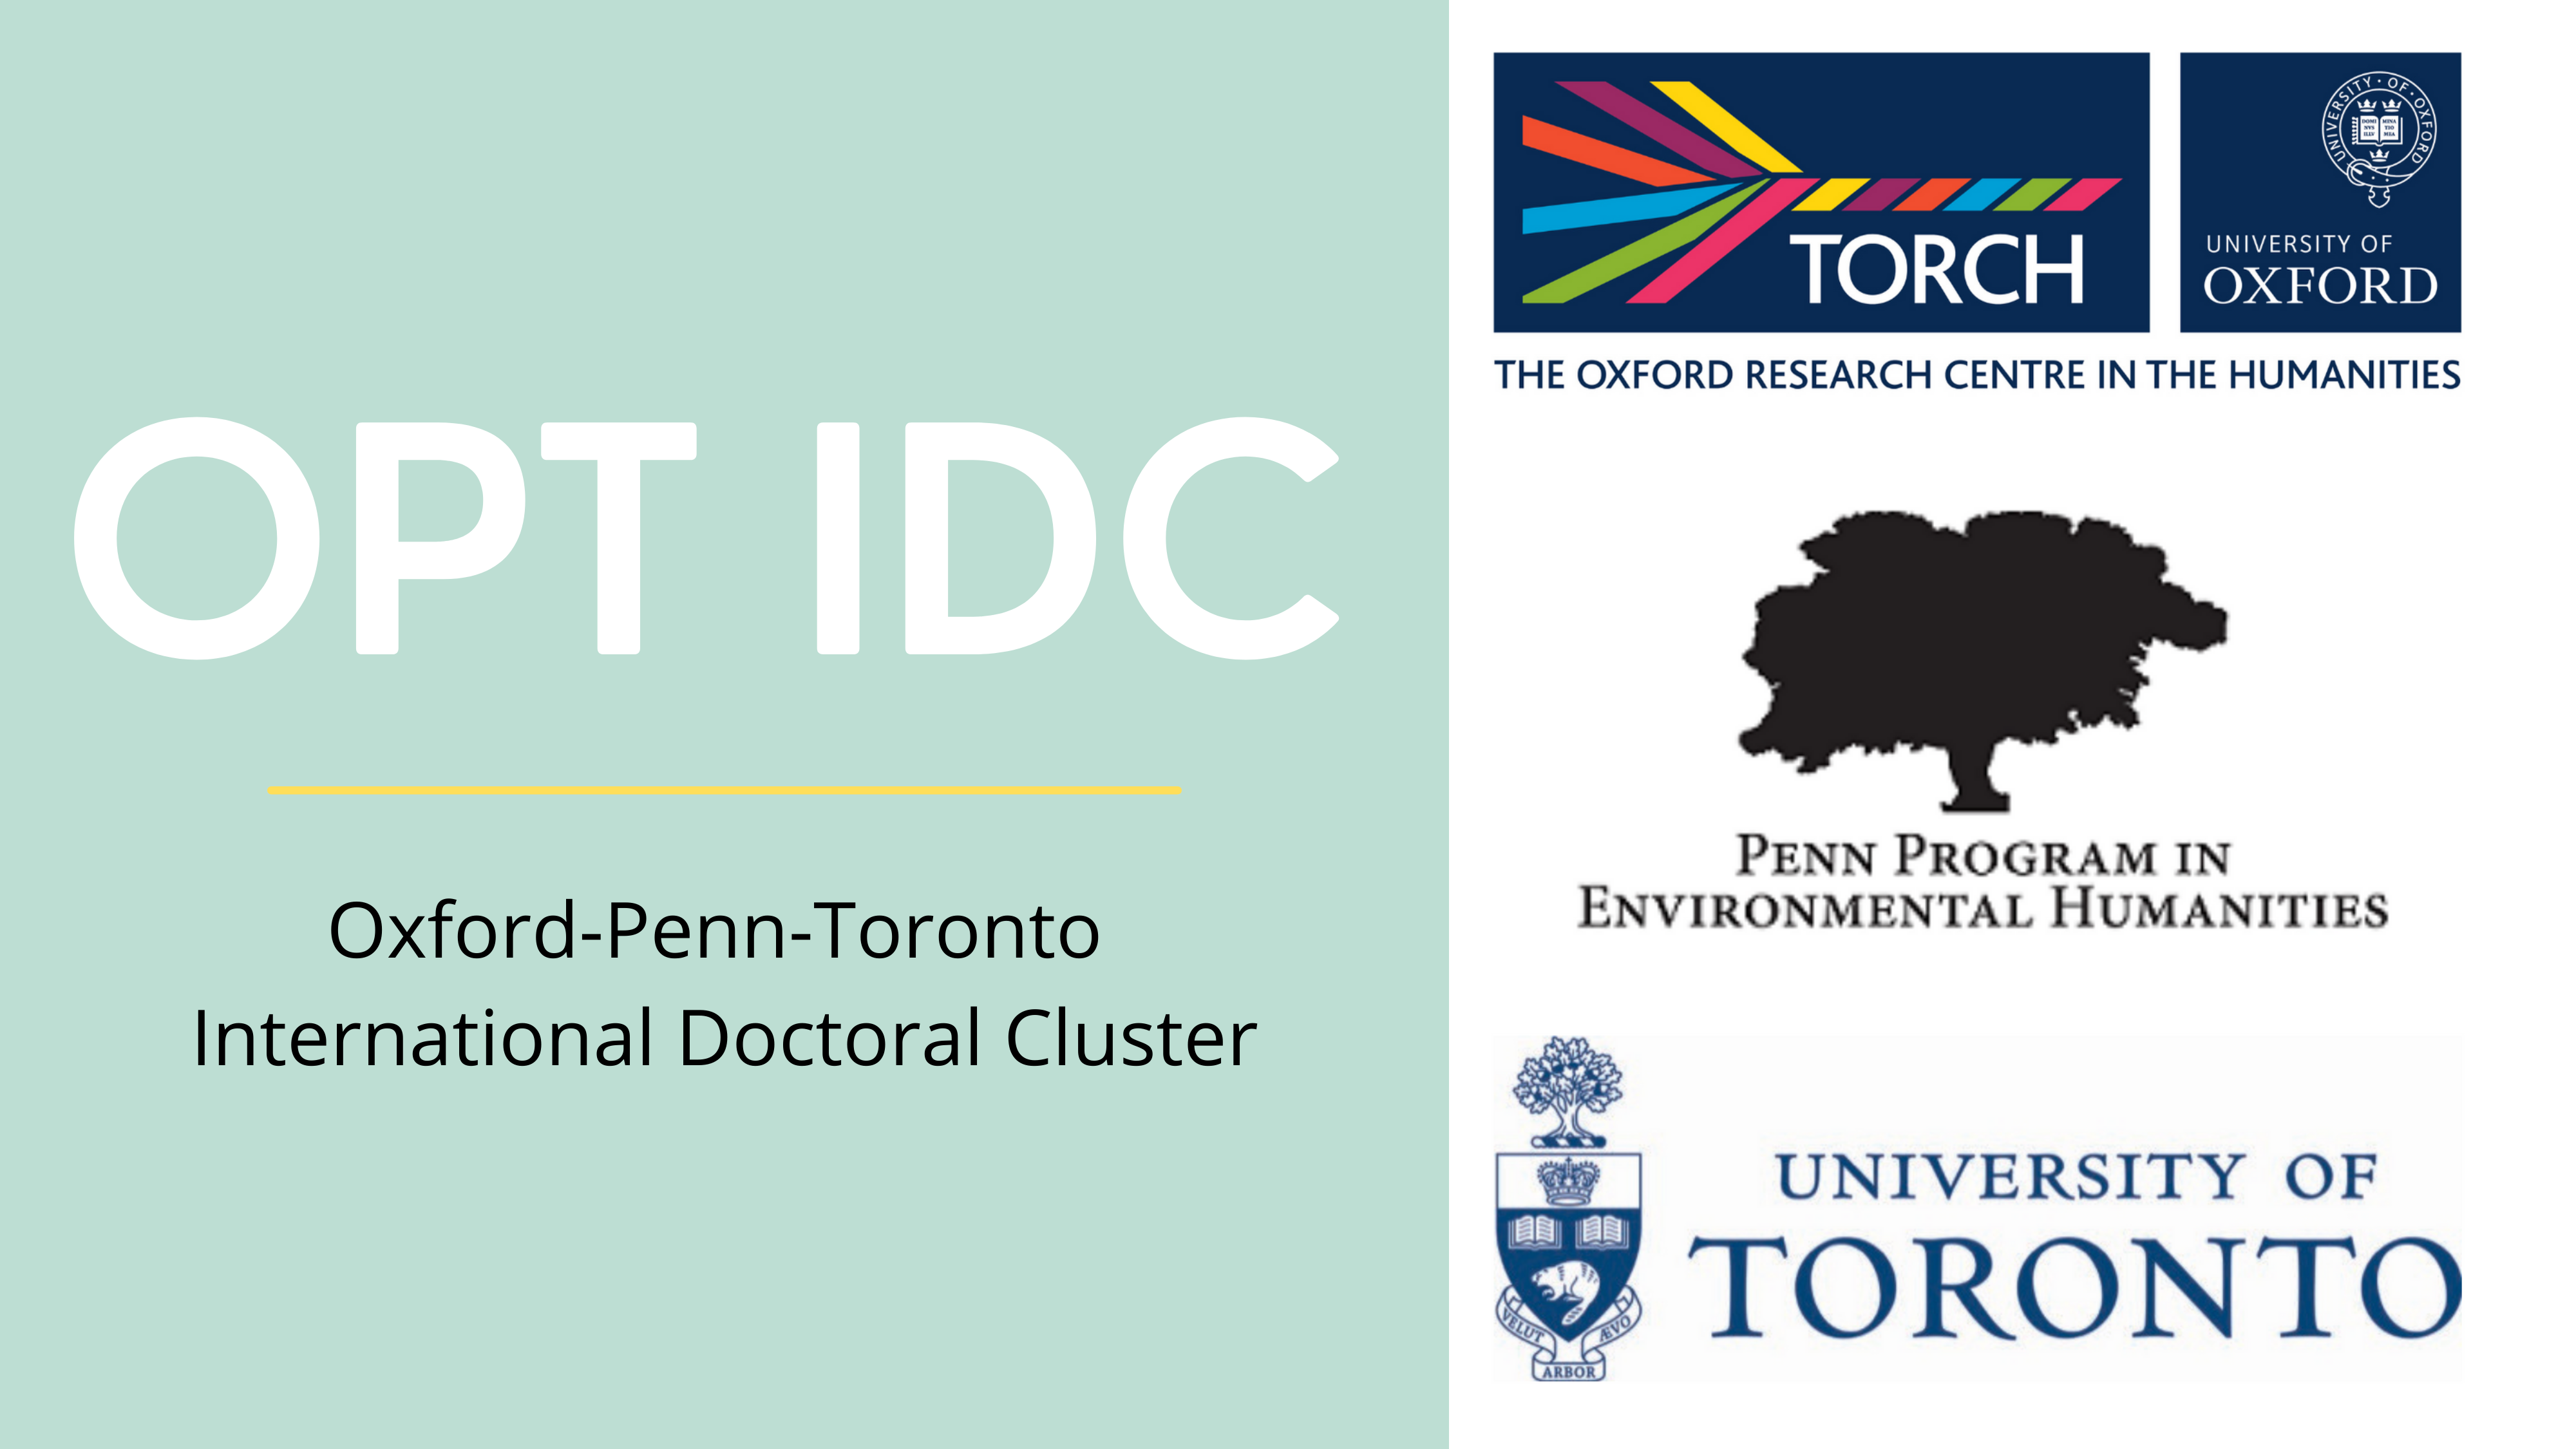 Oxford Penn Toronto International Doctoral Cluster text and logos from each institution